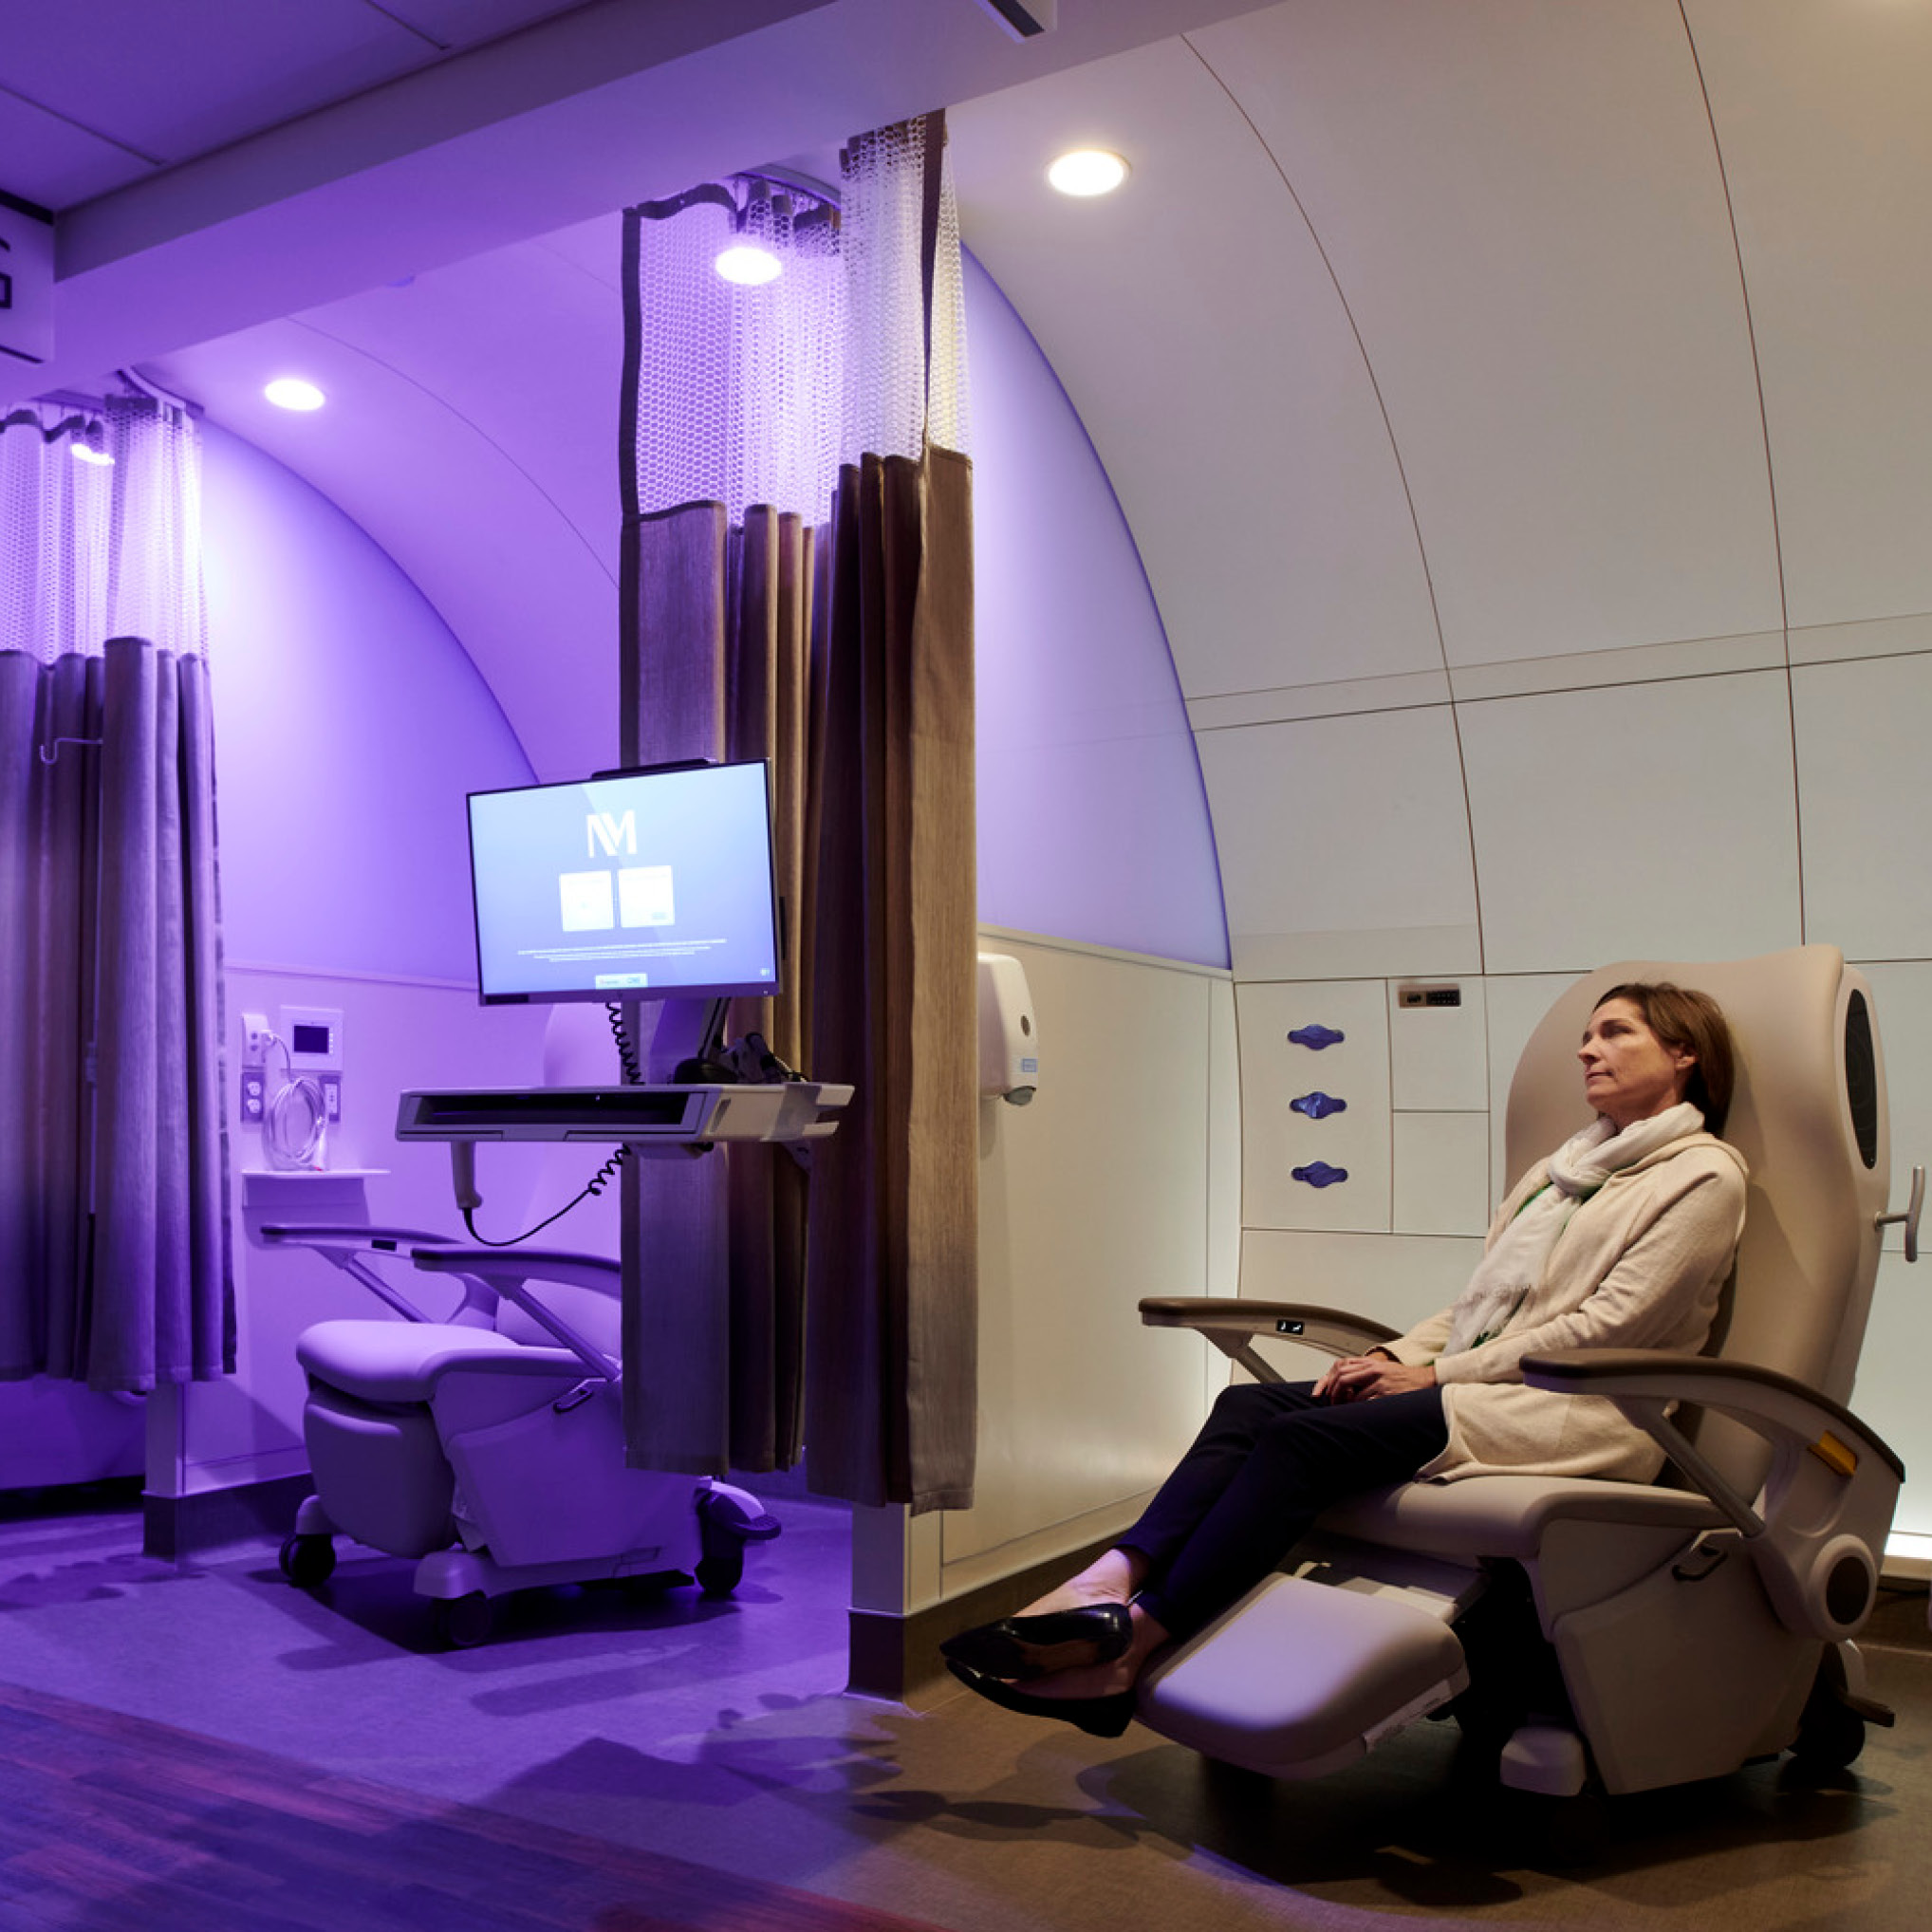 Not Only Lives, New Northwestern ED Pods Save Time, Money and Space